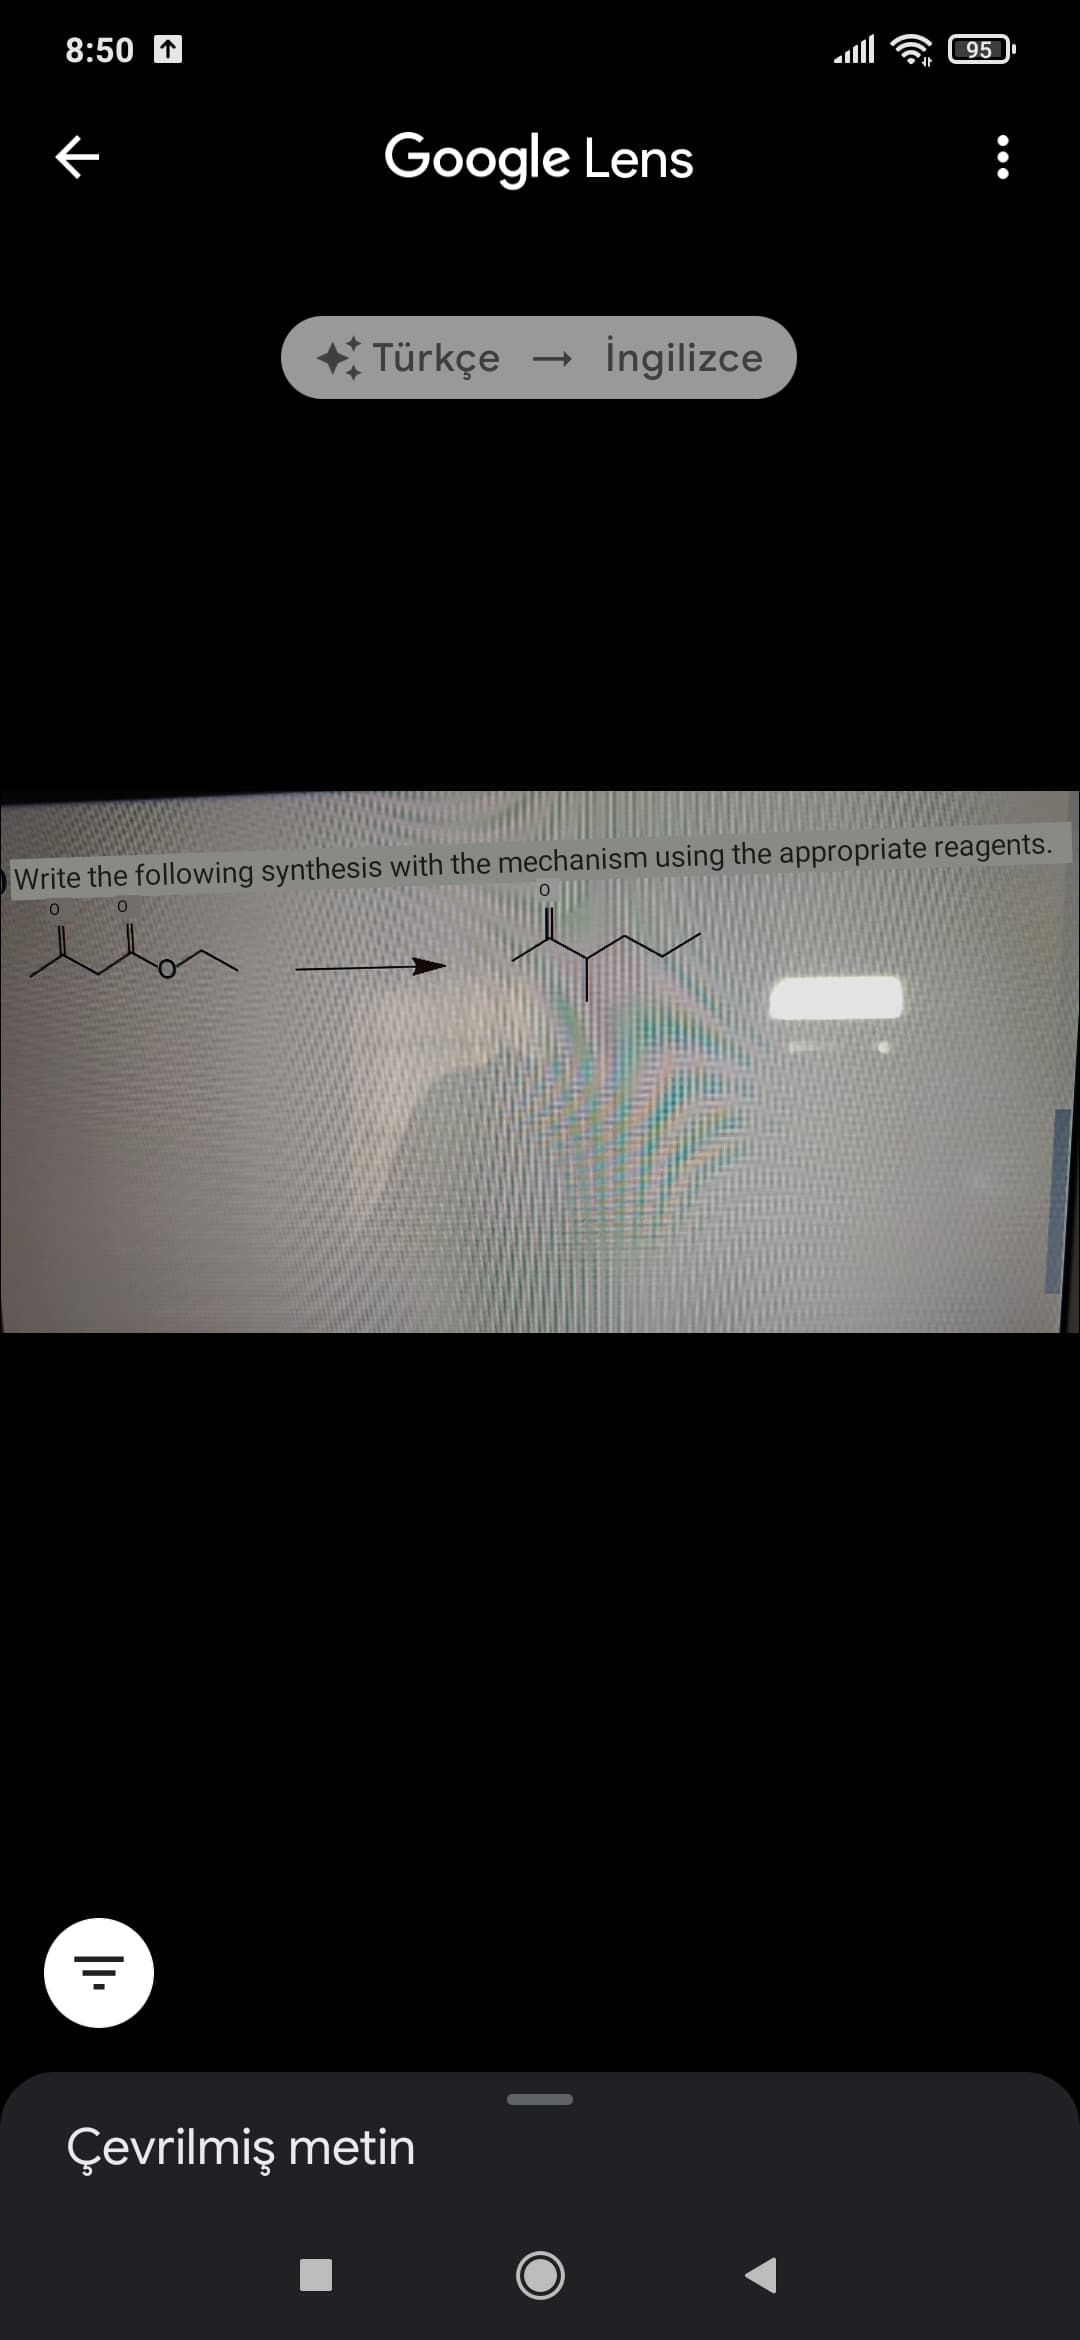 8:50
95
Google Lens
Türkçe
İngilizce
Write the following synthesis with the mechanism using the appropriate reagents.
Çevrilmiş metin
